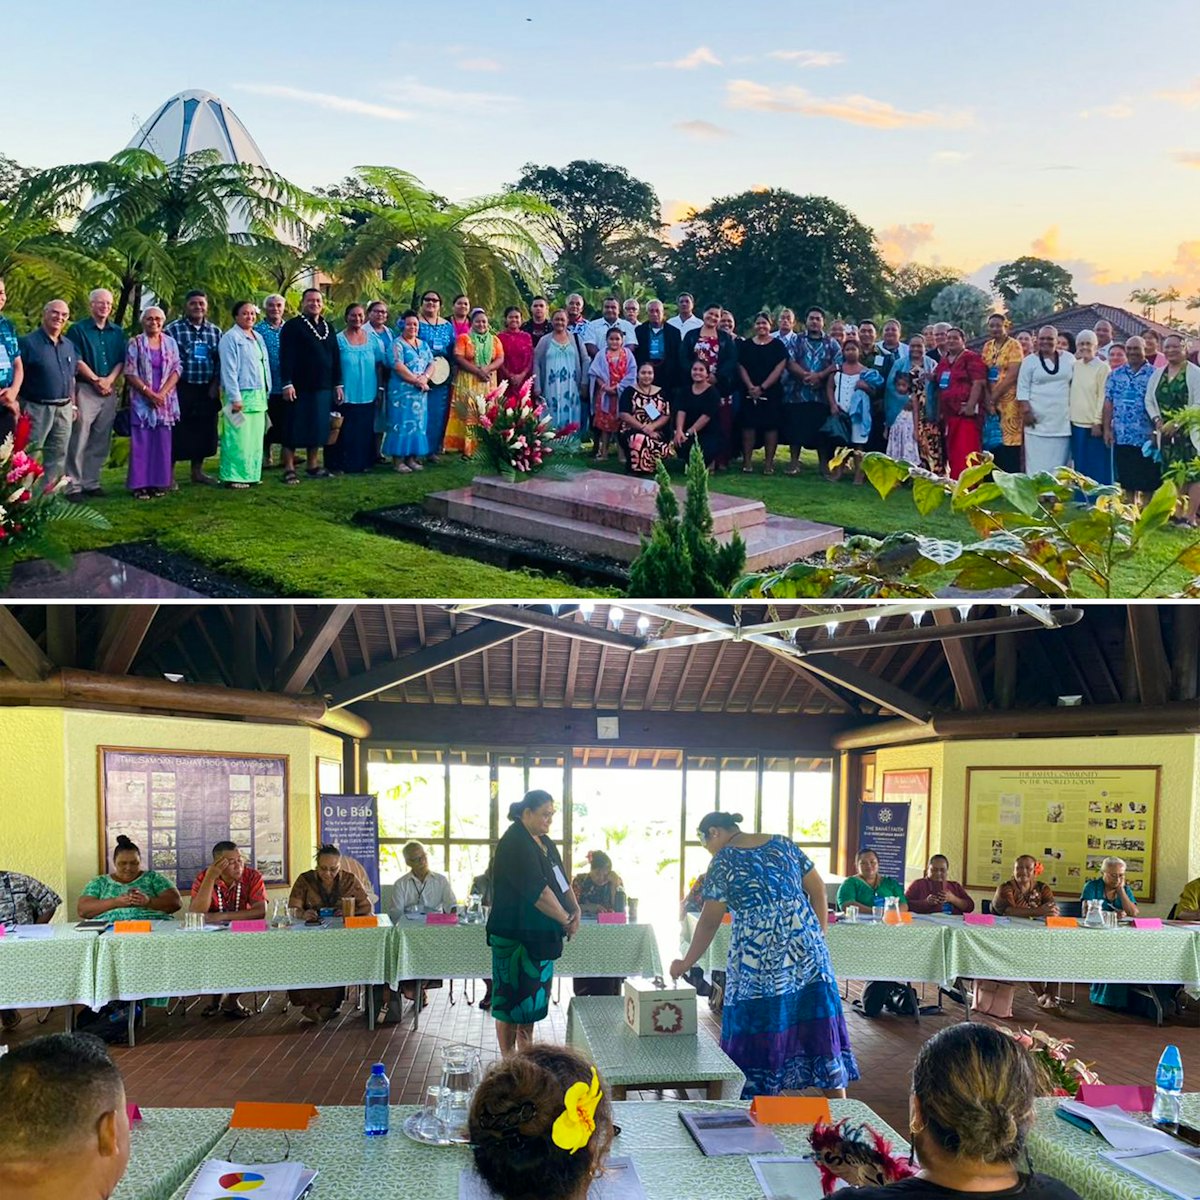 The 54th national convention of the Bahá’ís of the Samoan Islands took place at the site of the House of Worship.  Delegates visited the resting place of Hand of the Cause of God, Dr. Ugo Giachery, after dawn prayers.